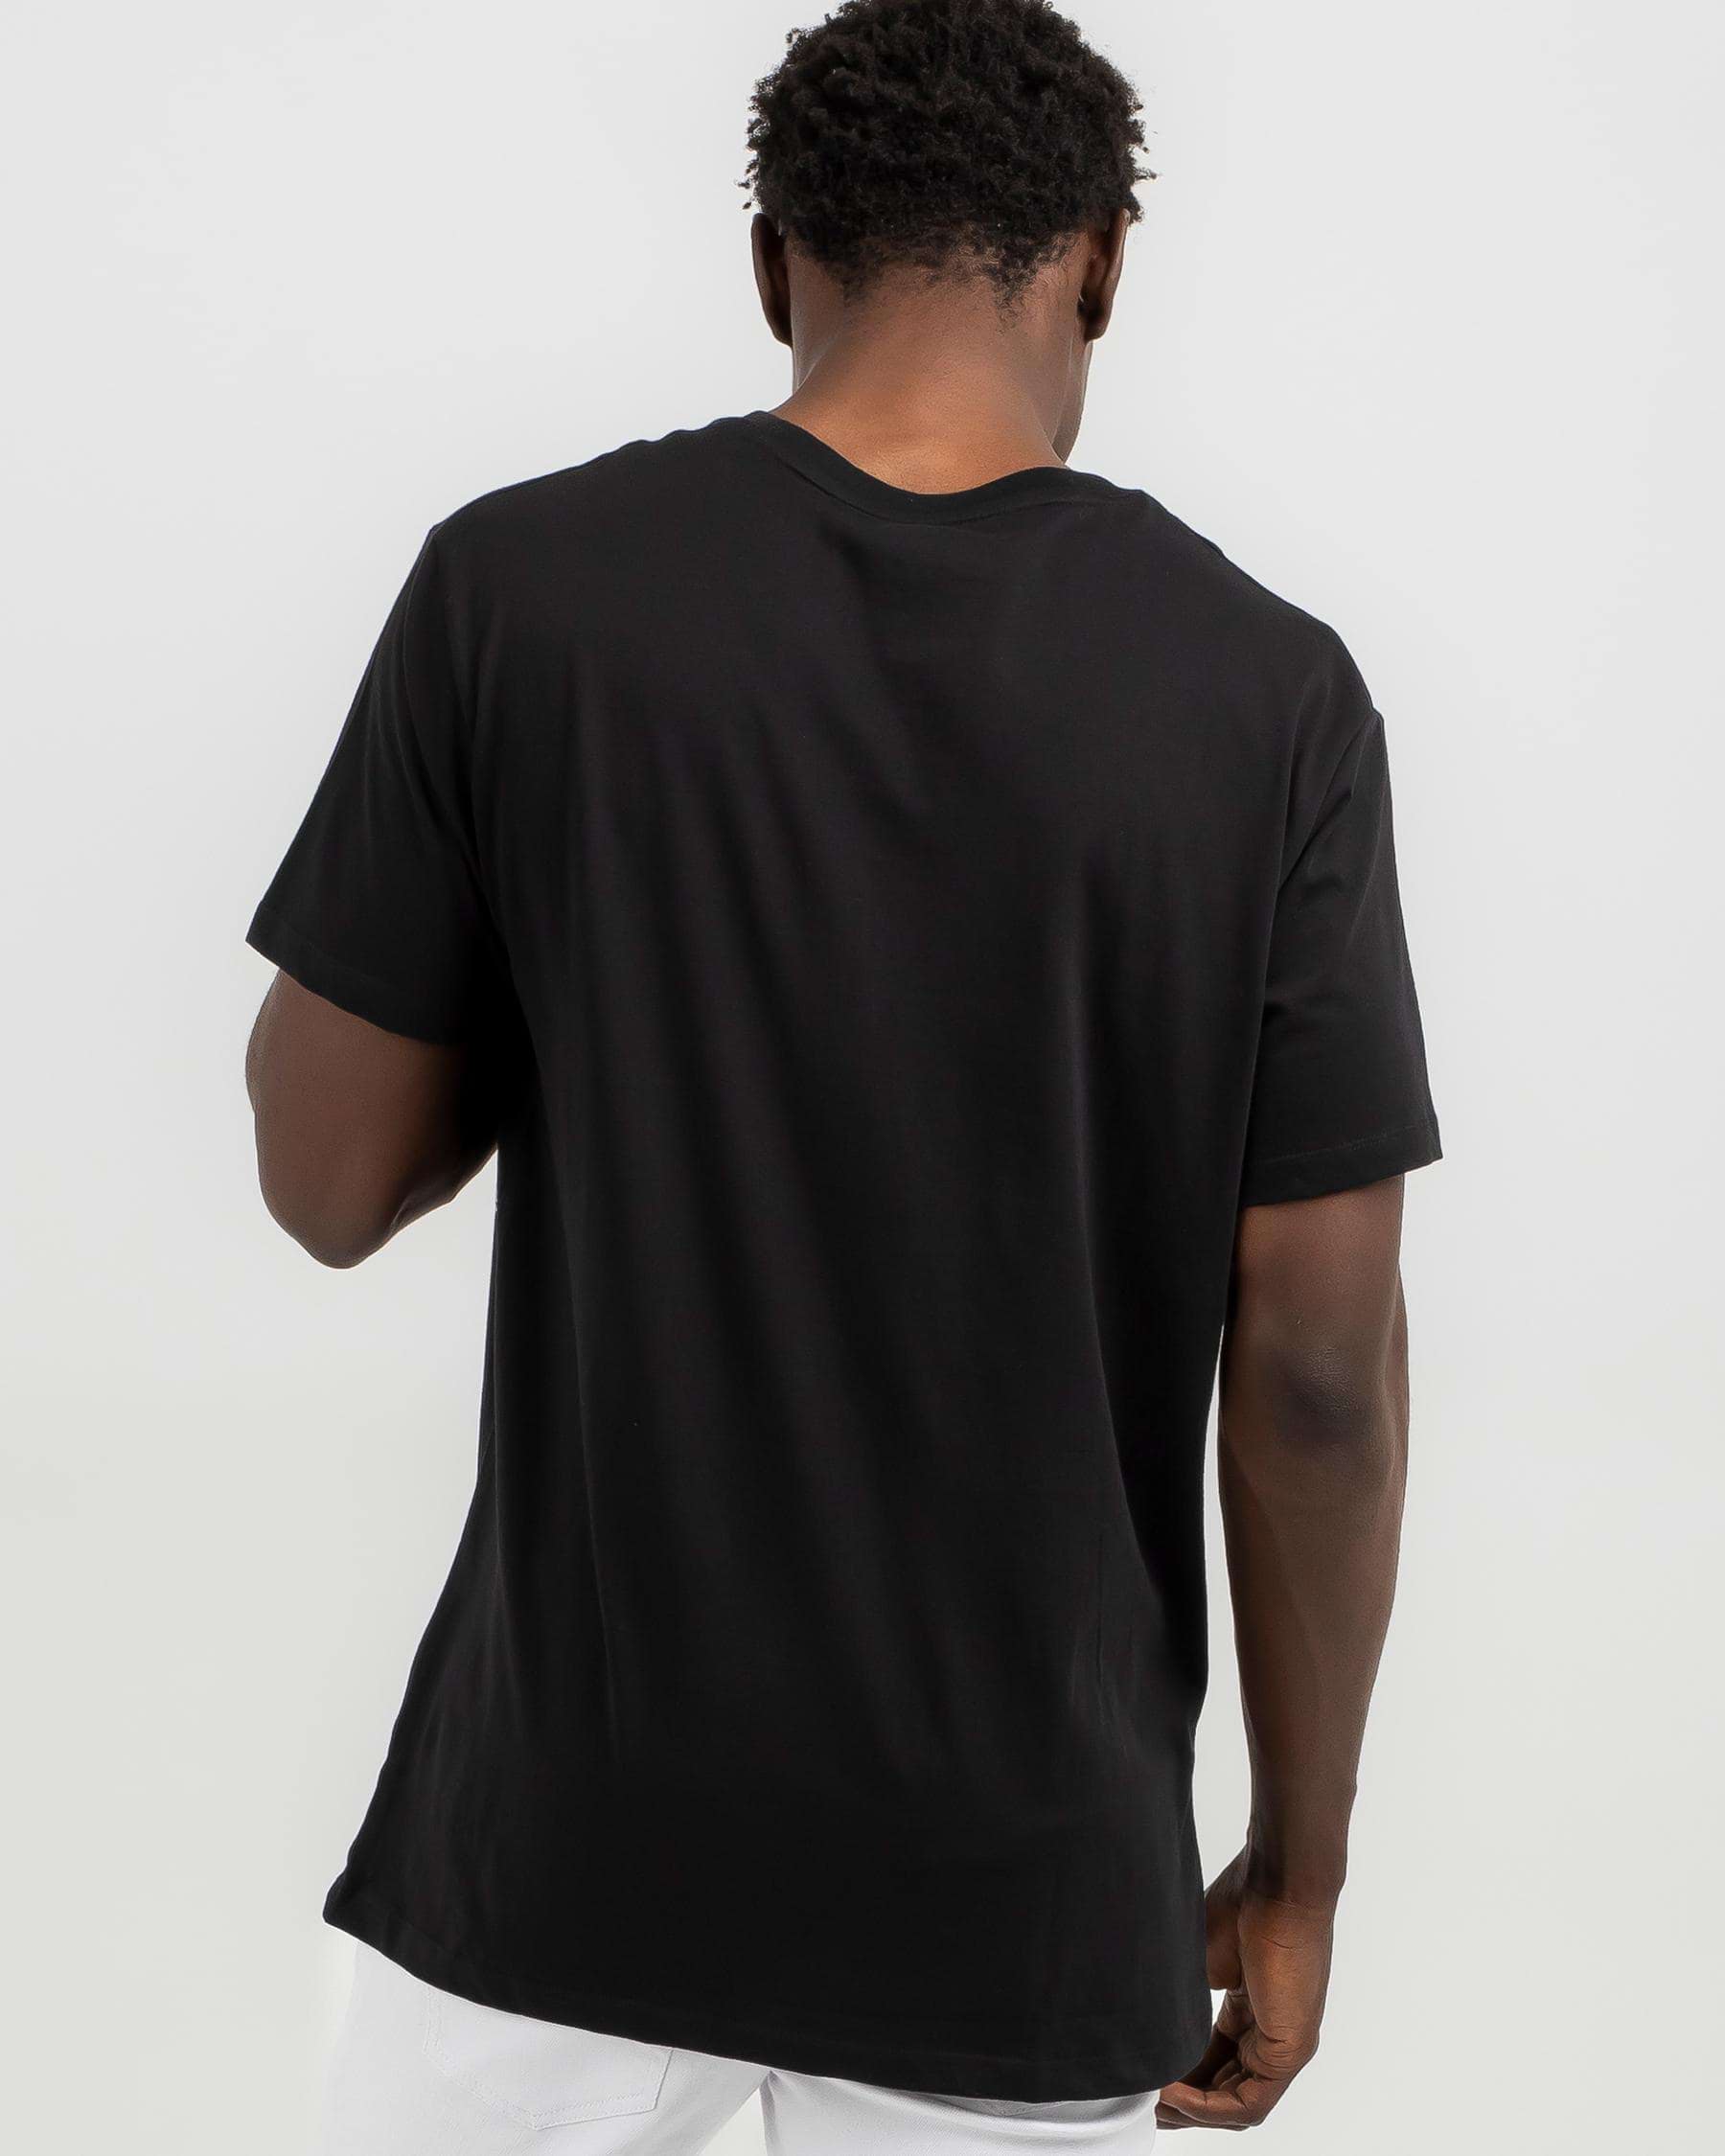 Unit Chance T-Shirt In Black - Fast Shipping & Easy Returns - City ...